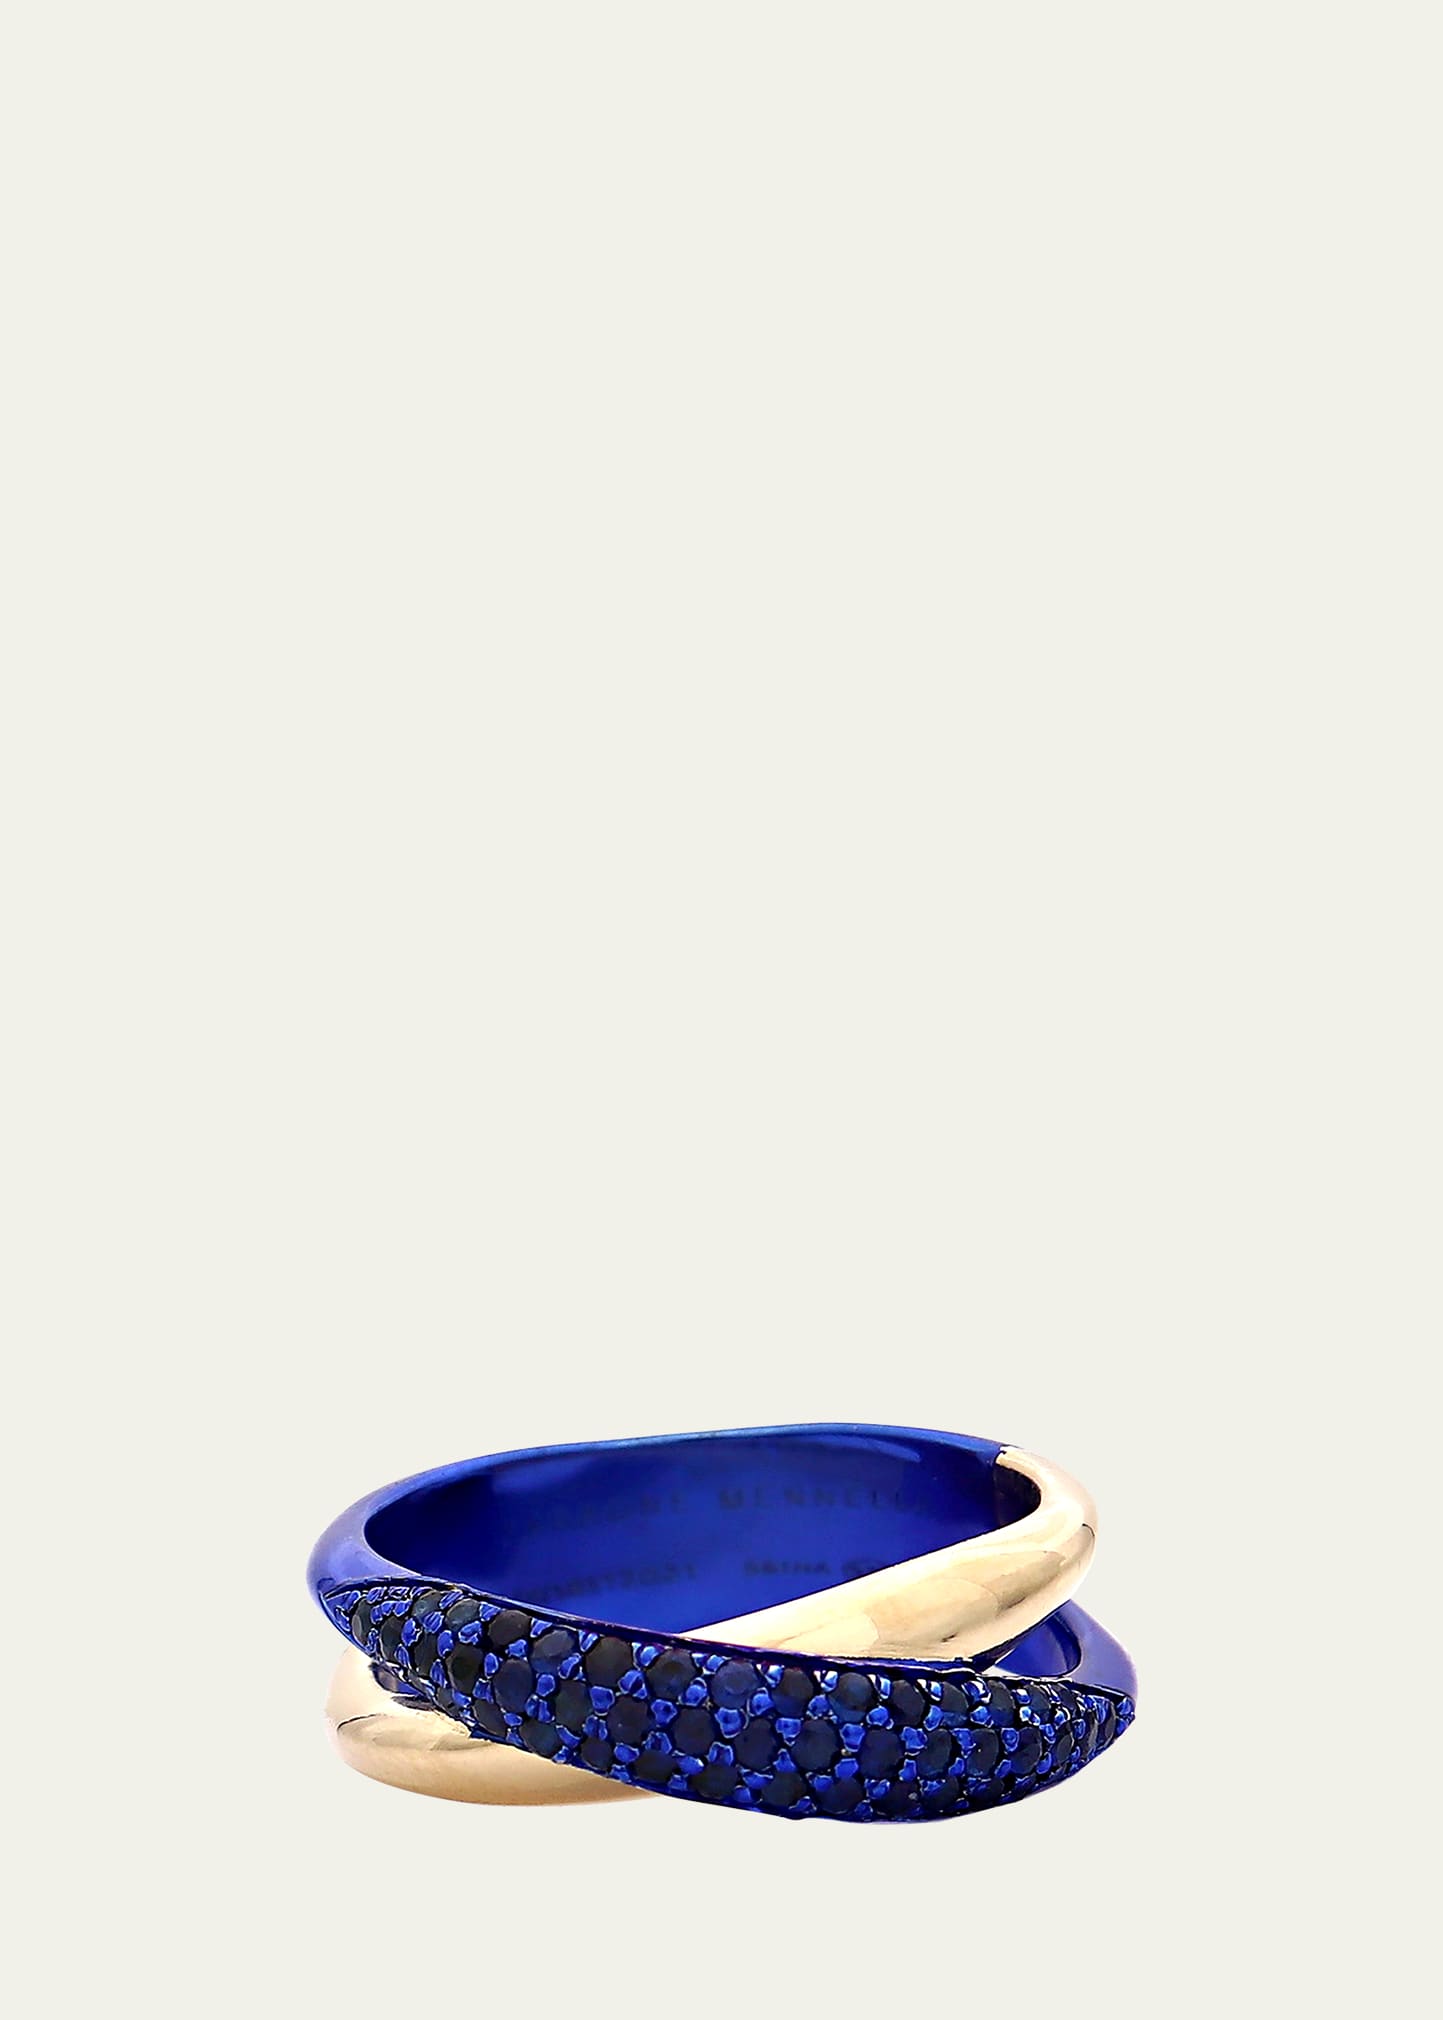 Faraone Mennella Margaux Ring in 18K Gold, Sterling Silver and Blue Sapphires